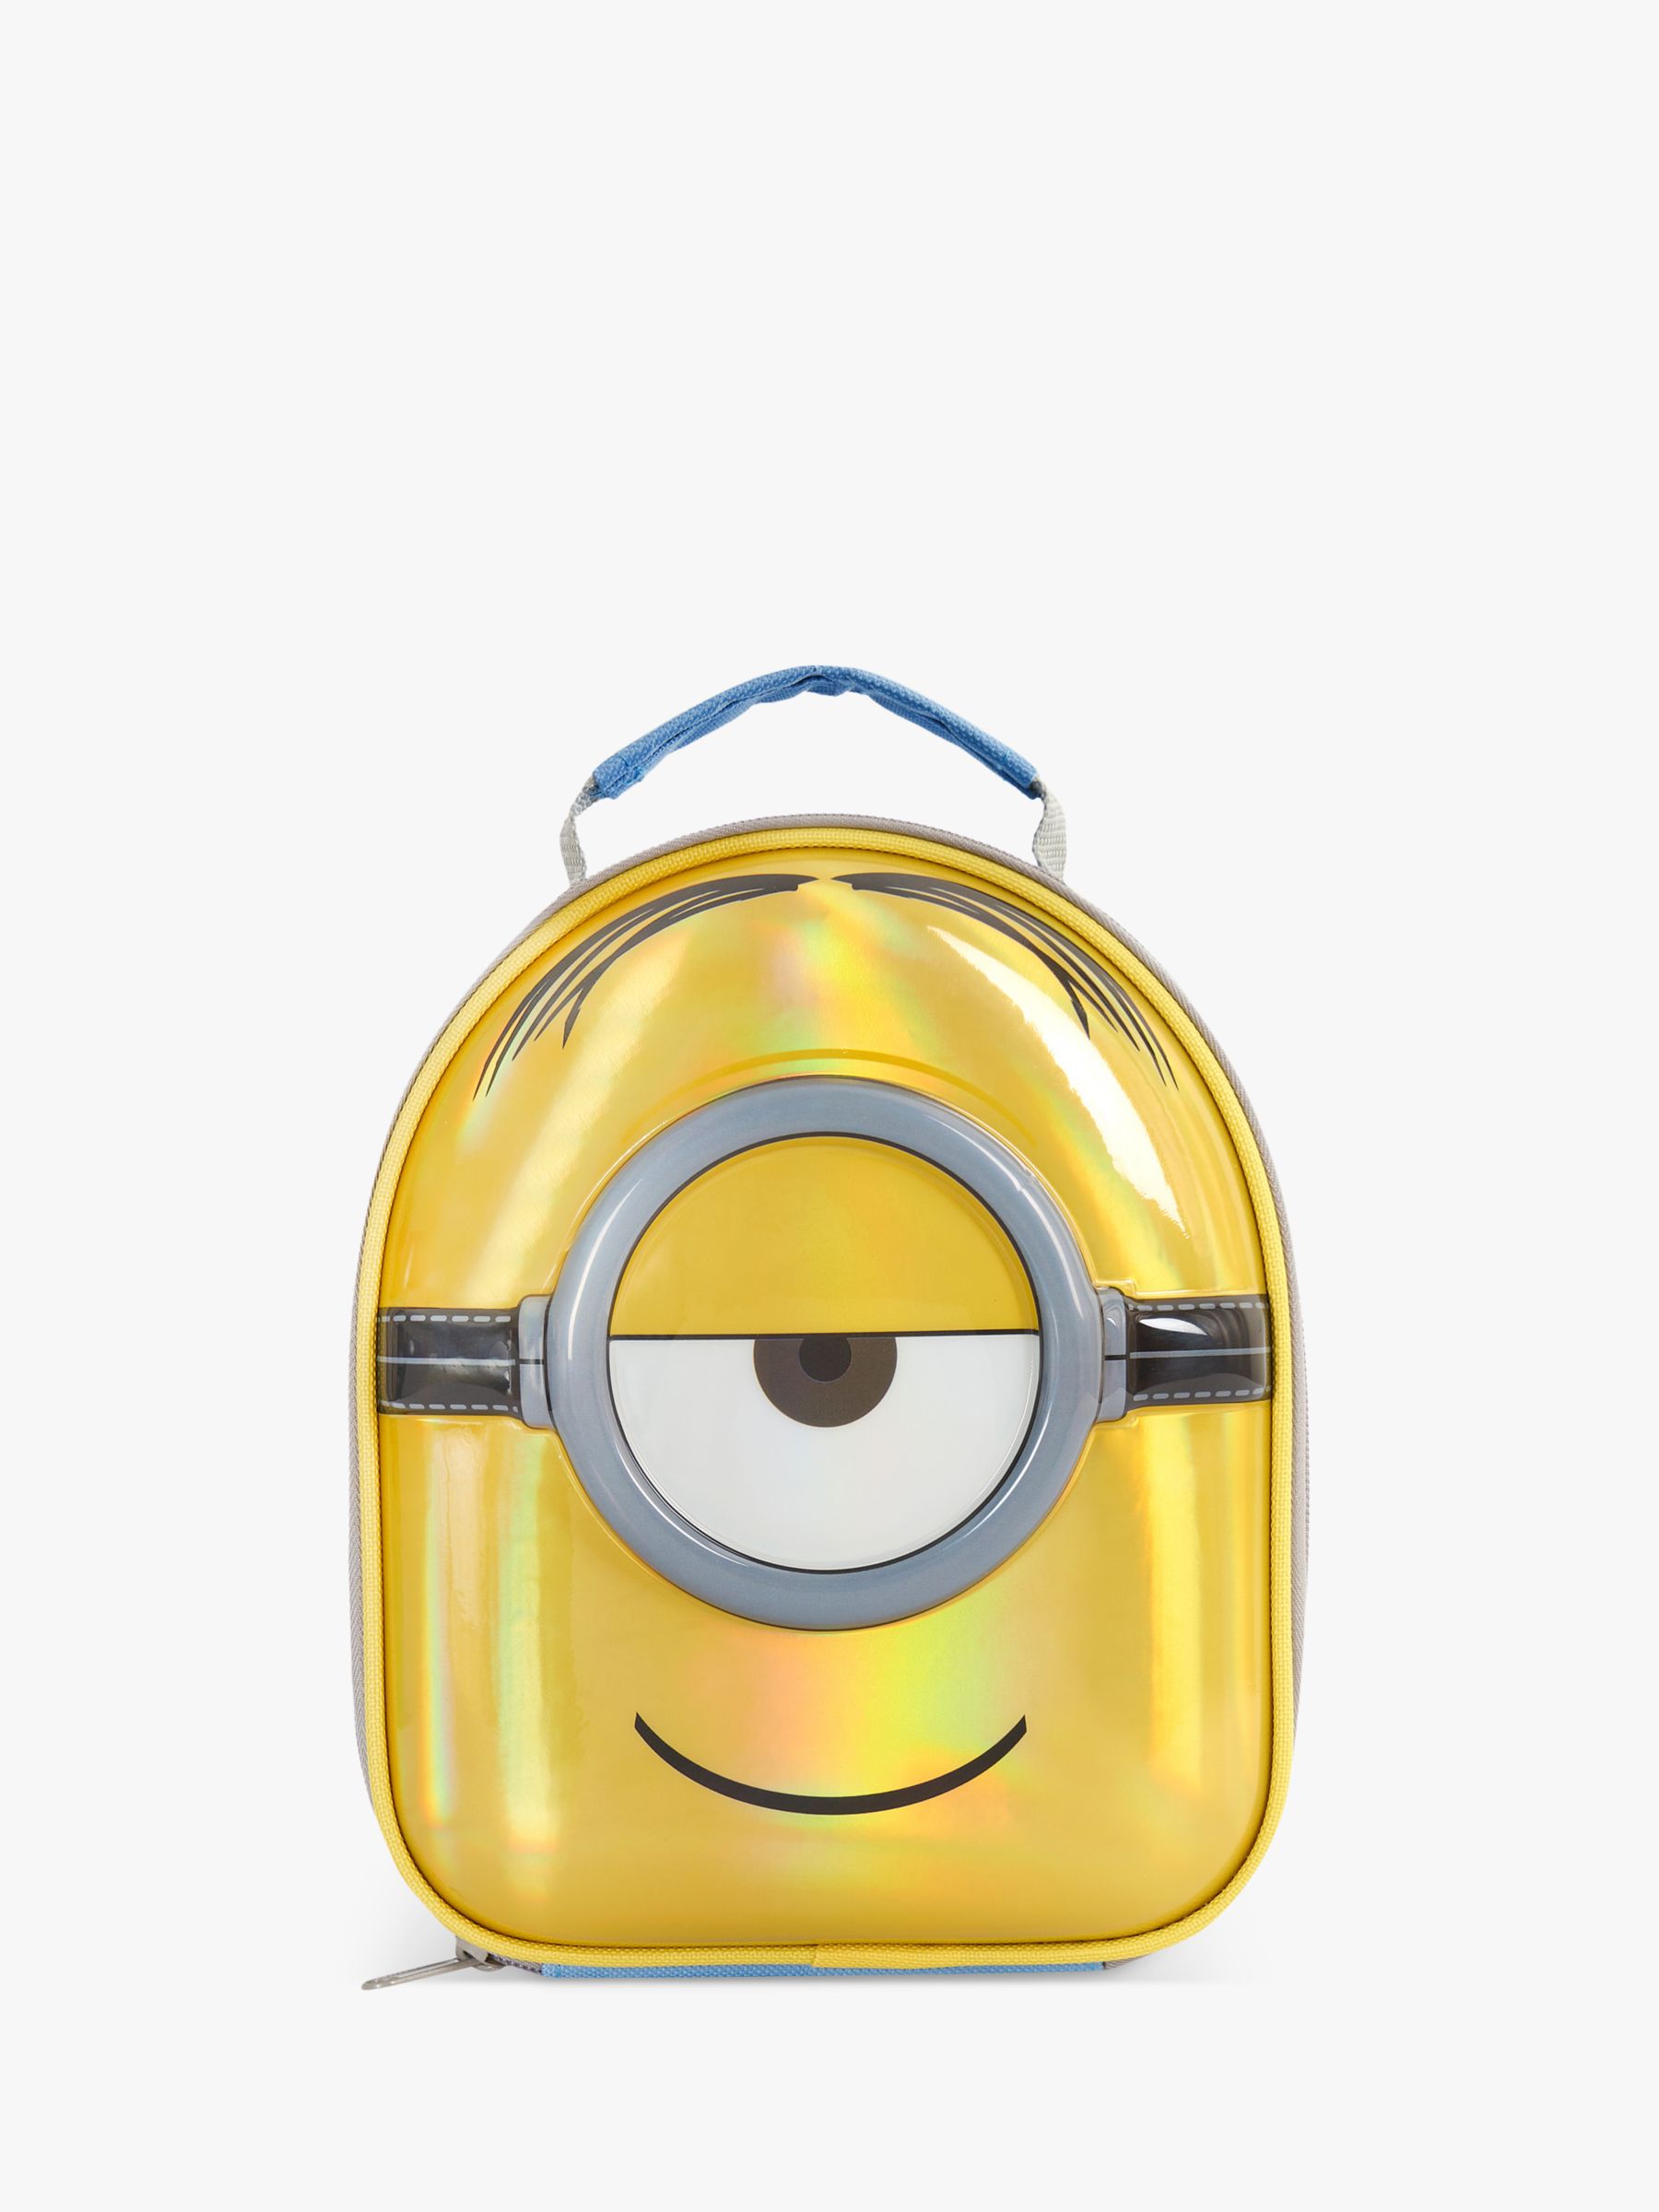 Minions Boys Underwear Multipacks : : Clothing, Shoes & Accessories